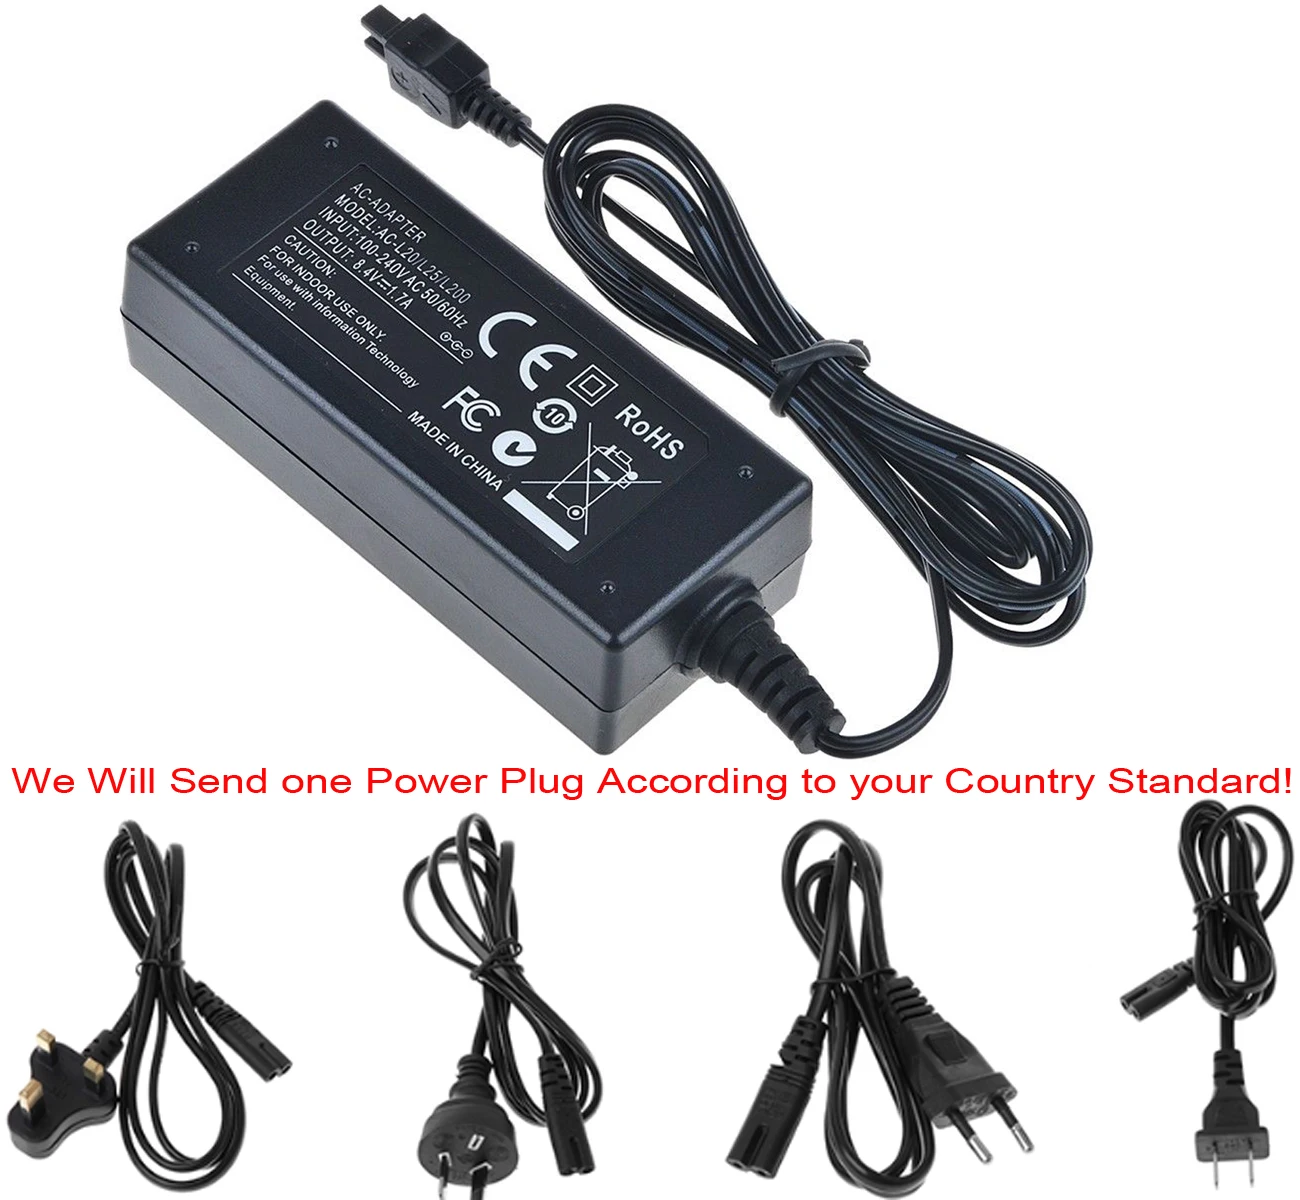 AC Wall Battery Power Charger Adapter for Sony Camcorder HDR-UX5 E HDR-UX7 E 